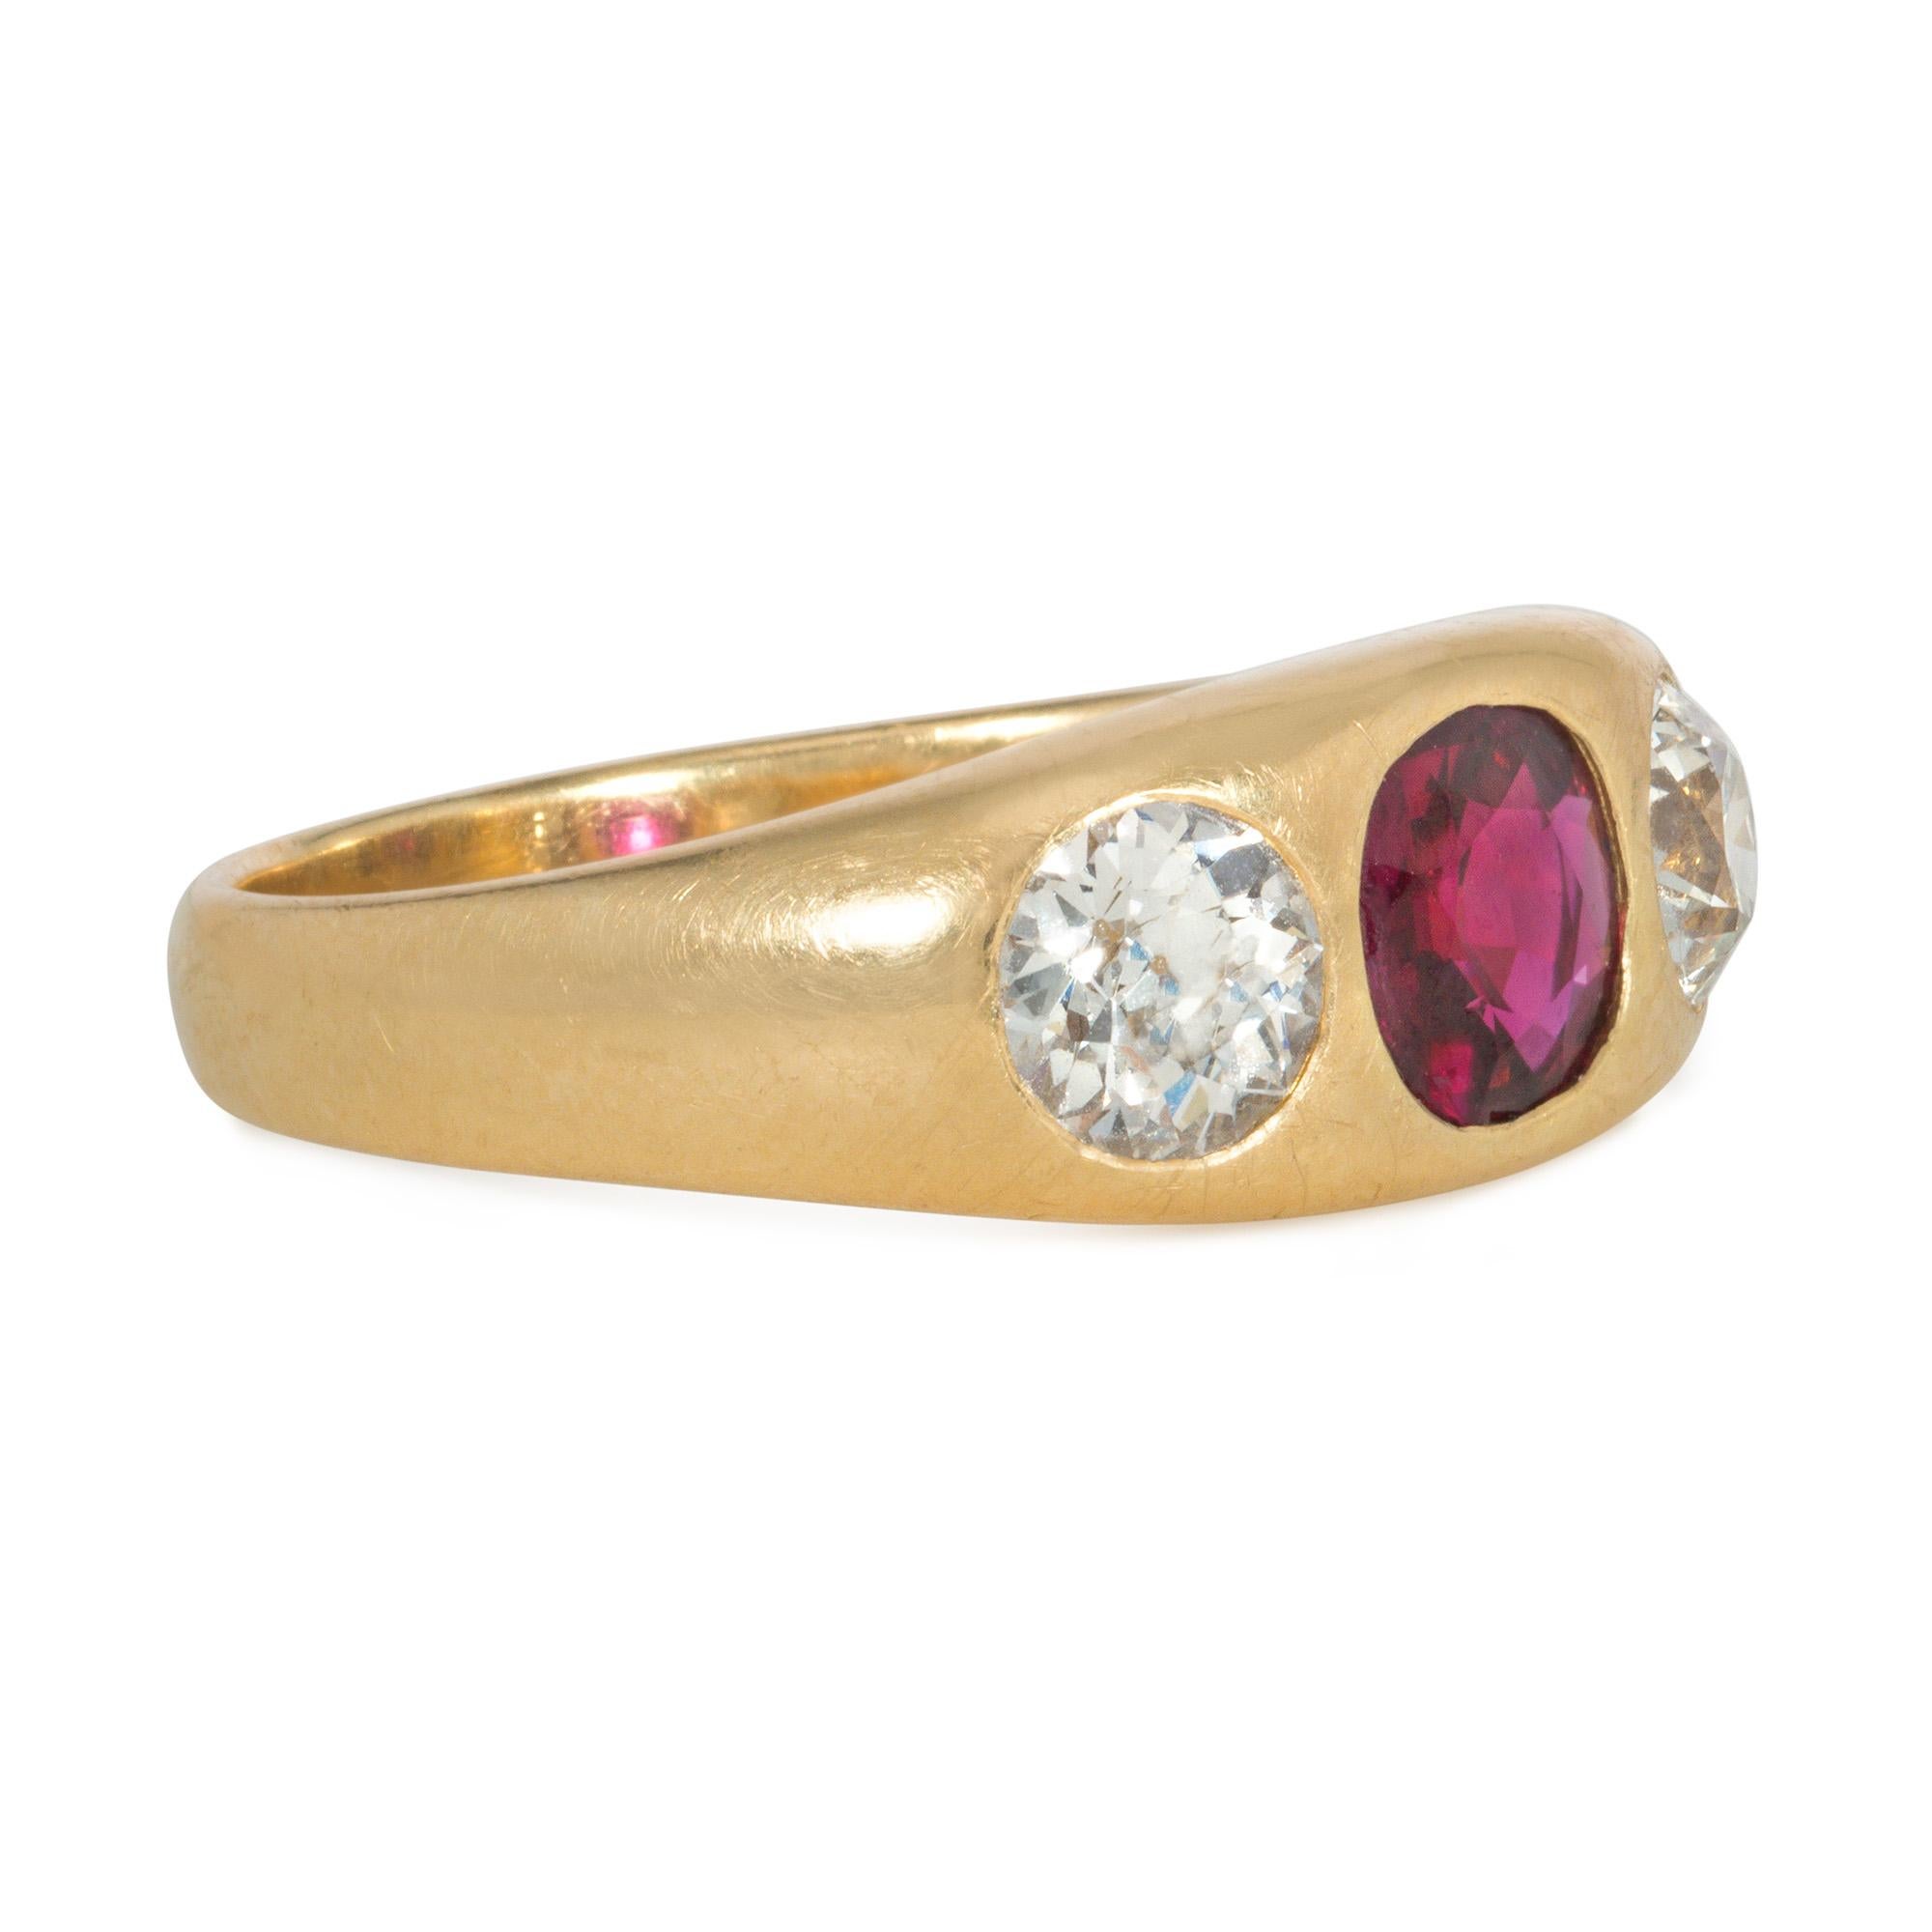 An antique Victorian gold and three-stone band ring comprised of a cushion-cut ruby flanked by two old European-cut diamonds, flush-set in 18k. Maker's mark FB. Ruby: Thai, 1.18cts.  AGL document no. 1132653. Two diamonds approximately 1.70